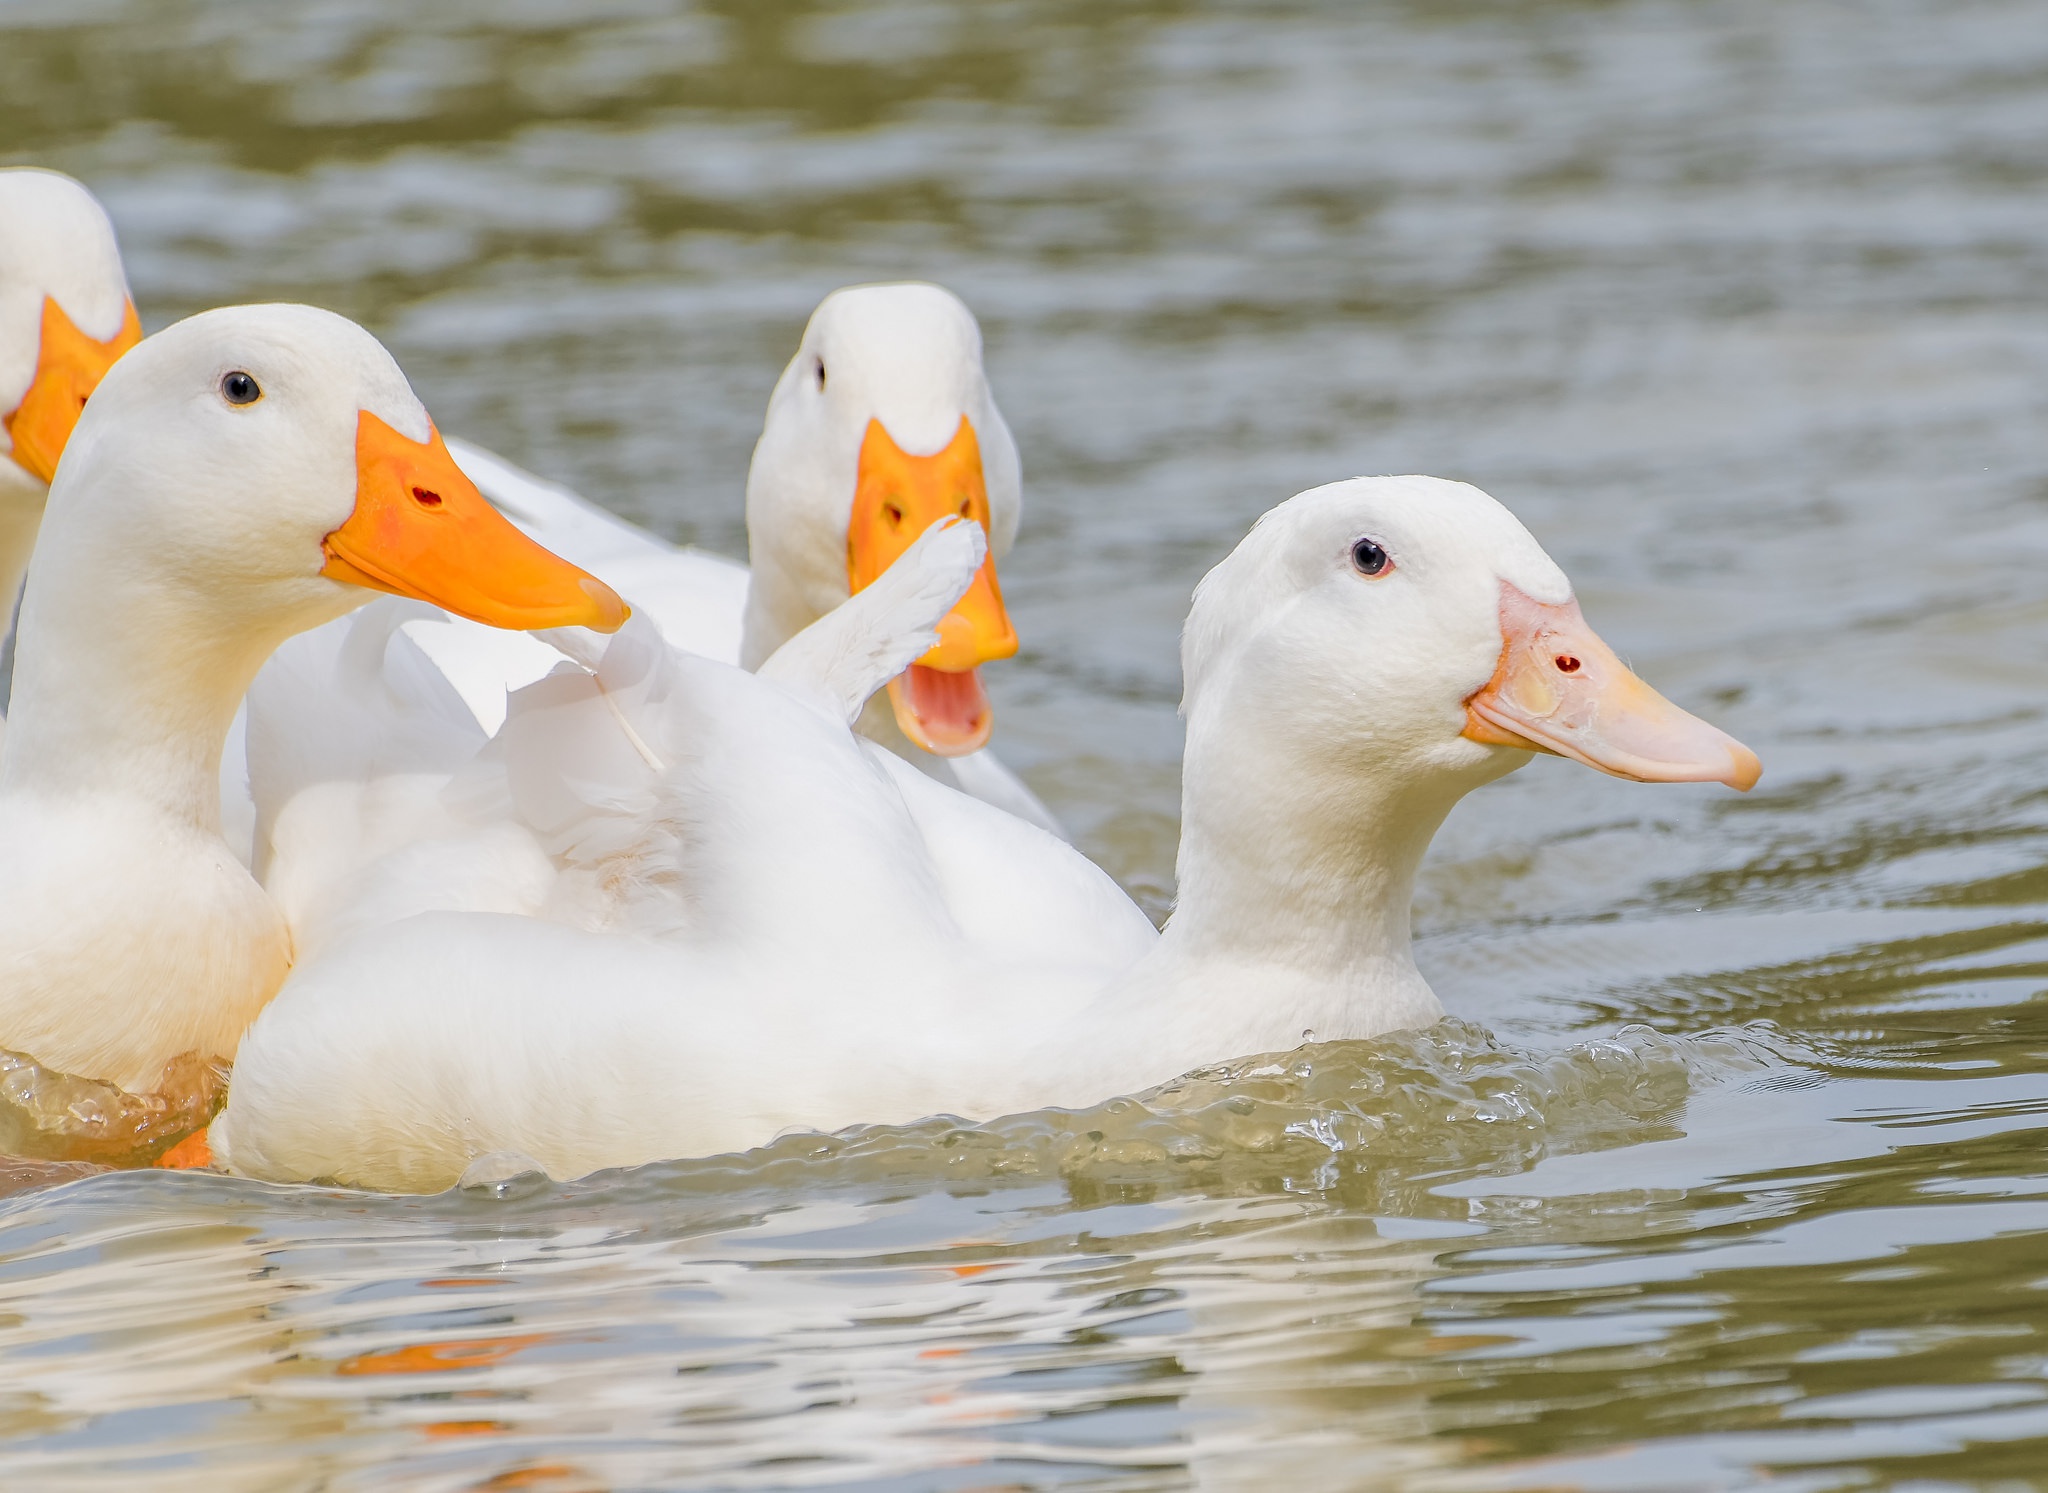 General 2048x1493 animals birds duck in water outdoors white yellow water nature closeup